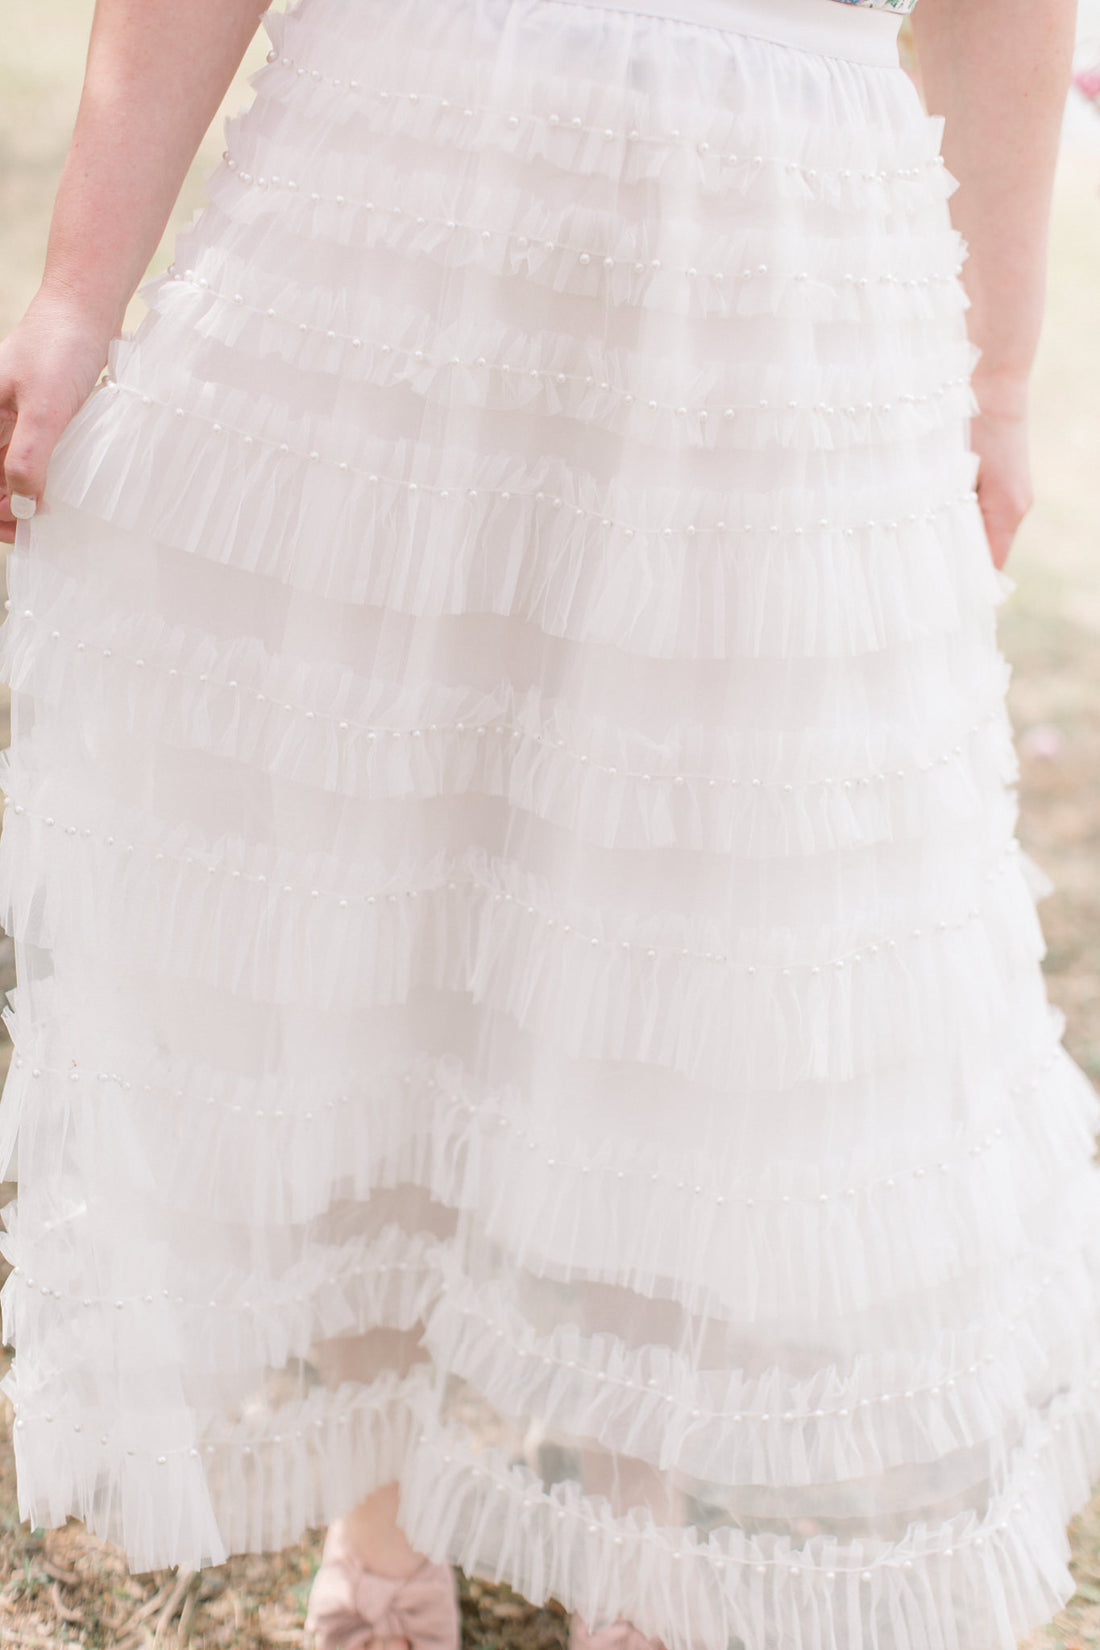 Coco White Pearl Skirt